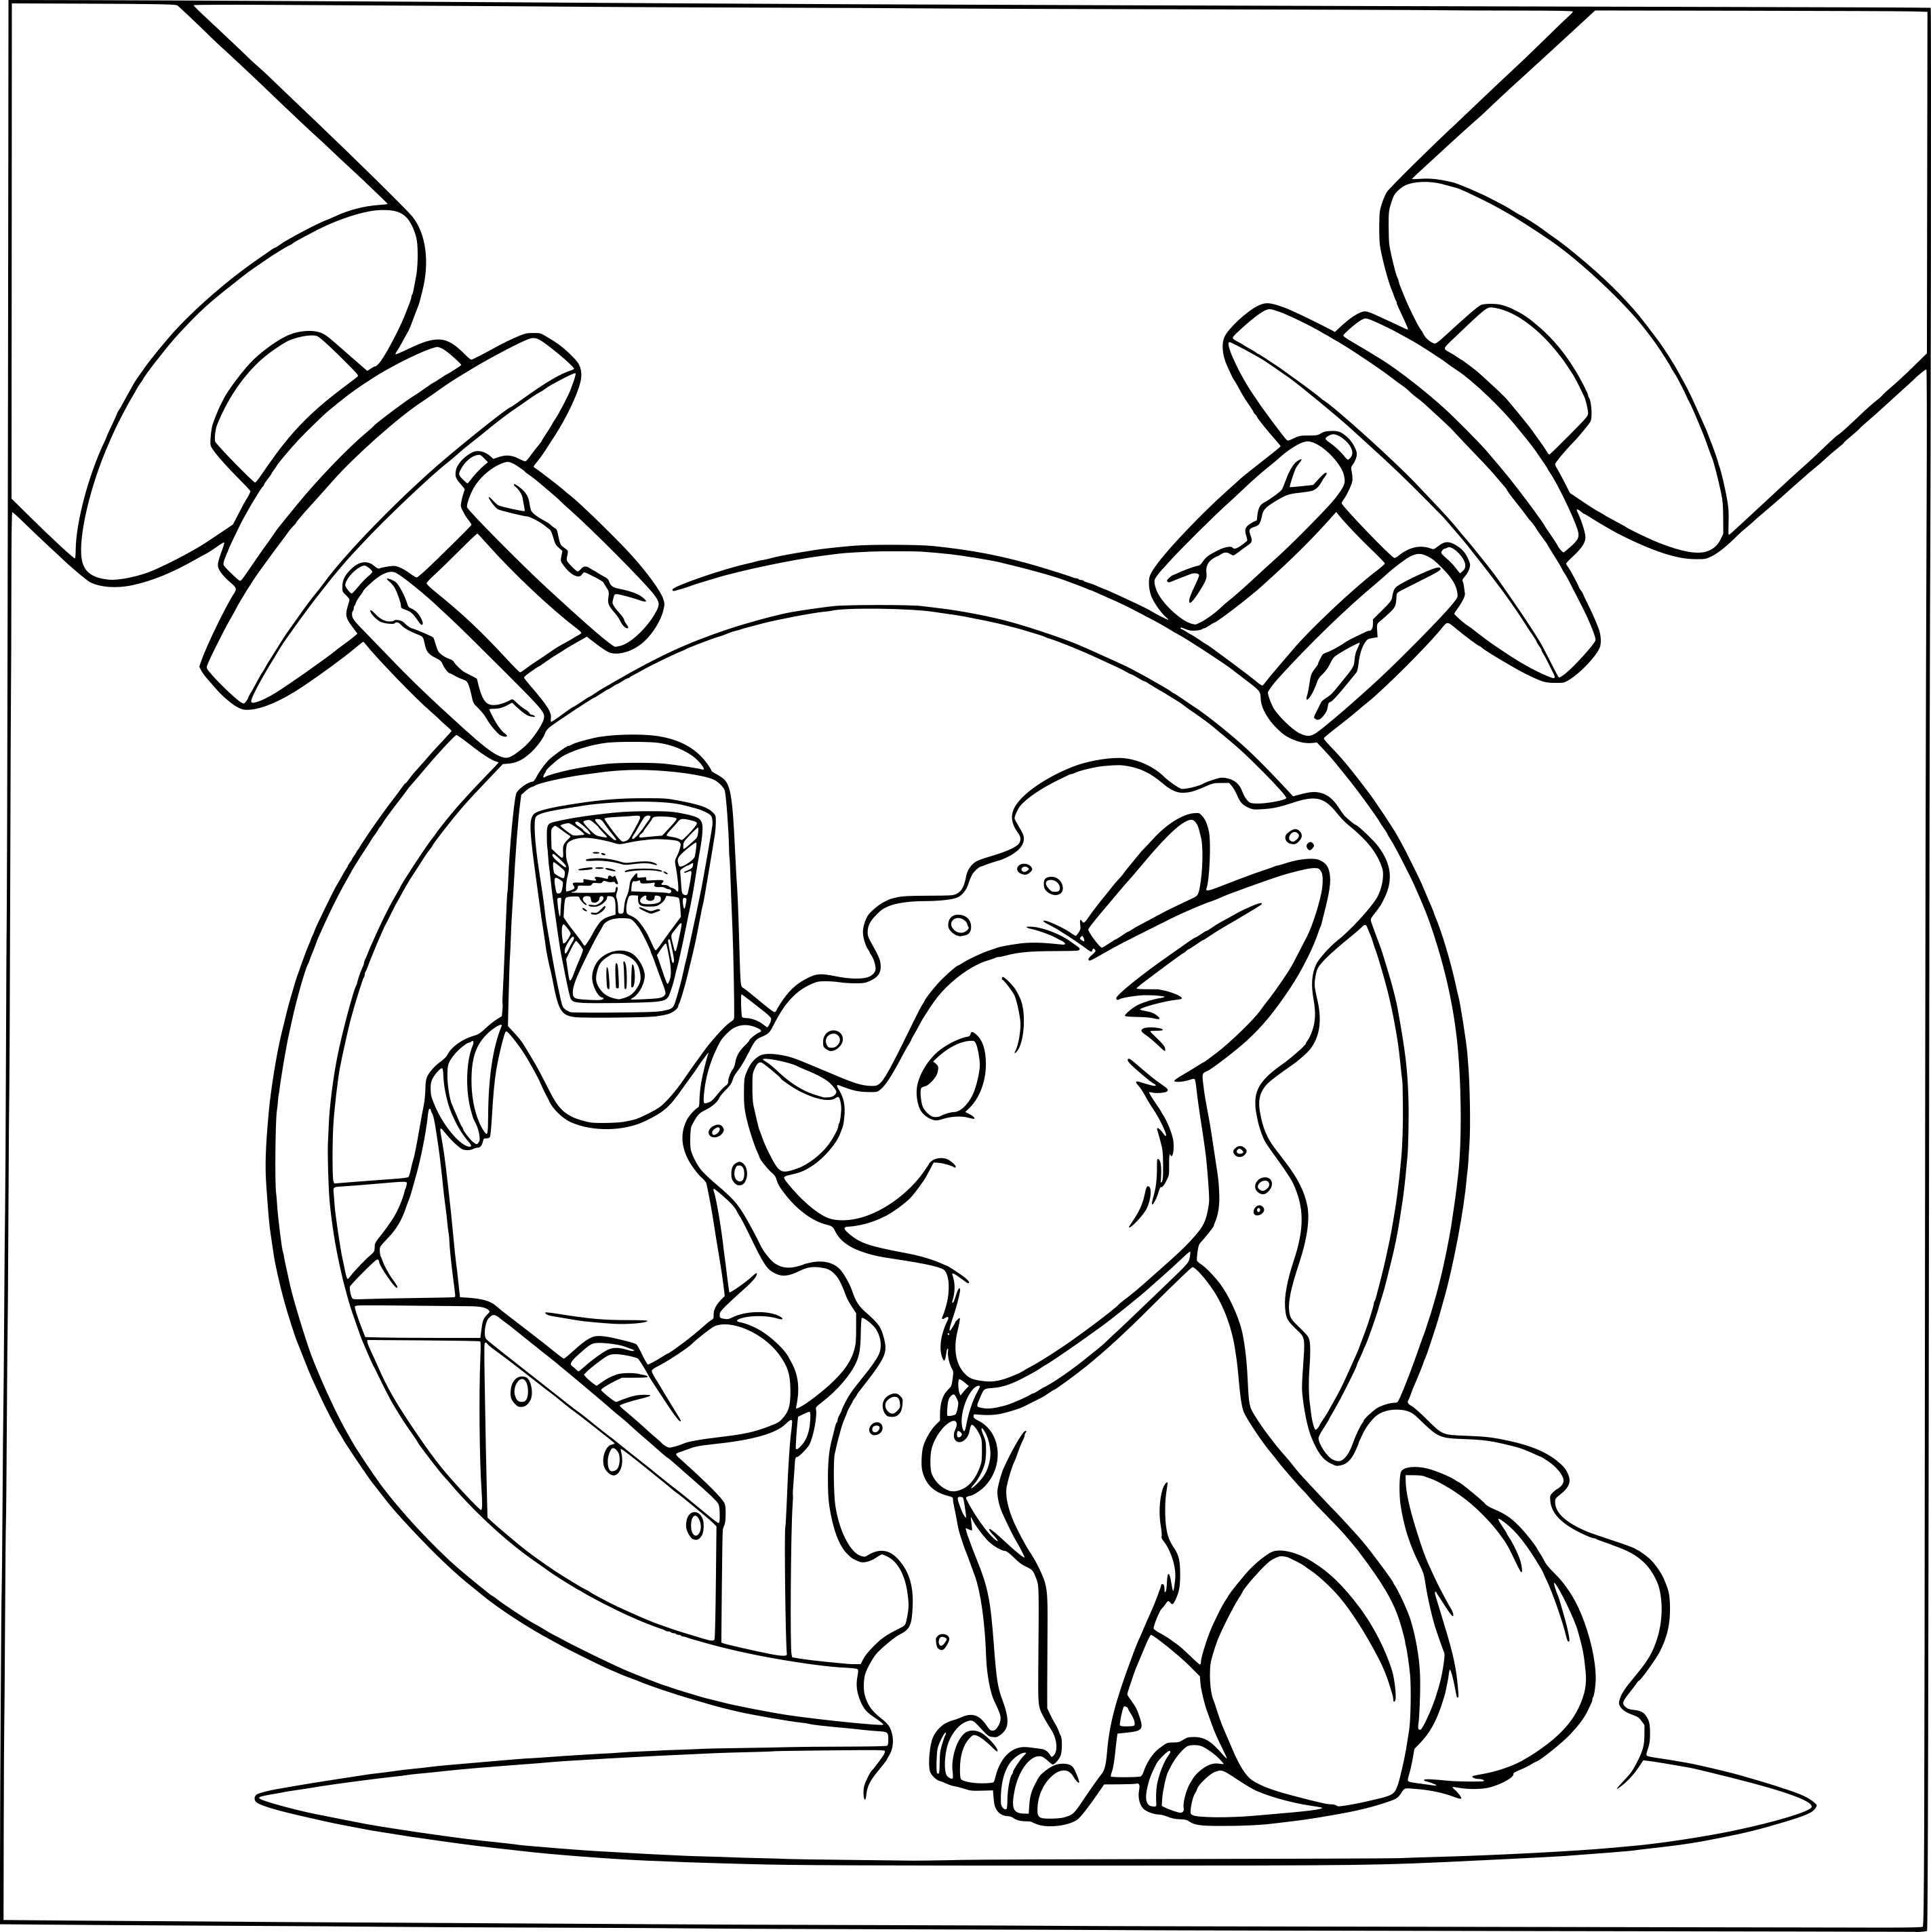 Volt drawing and coloring page